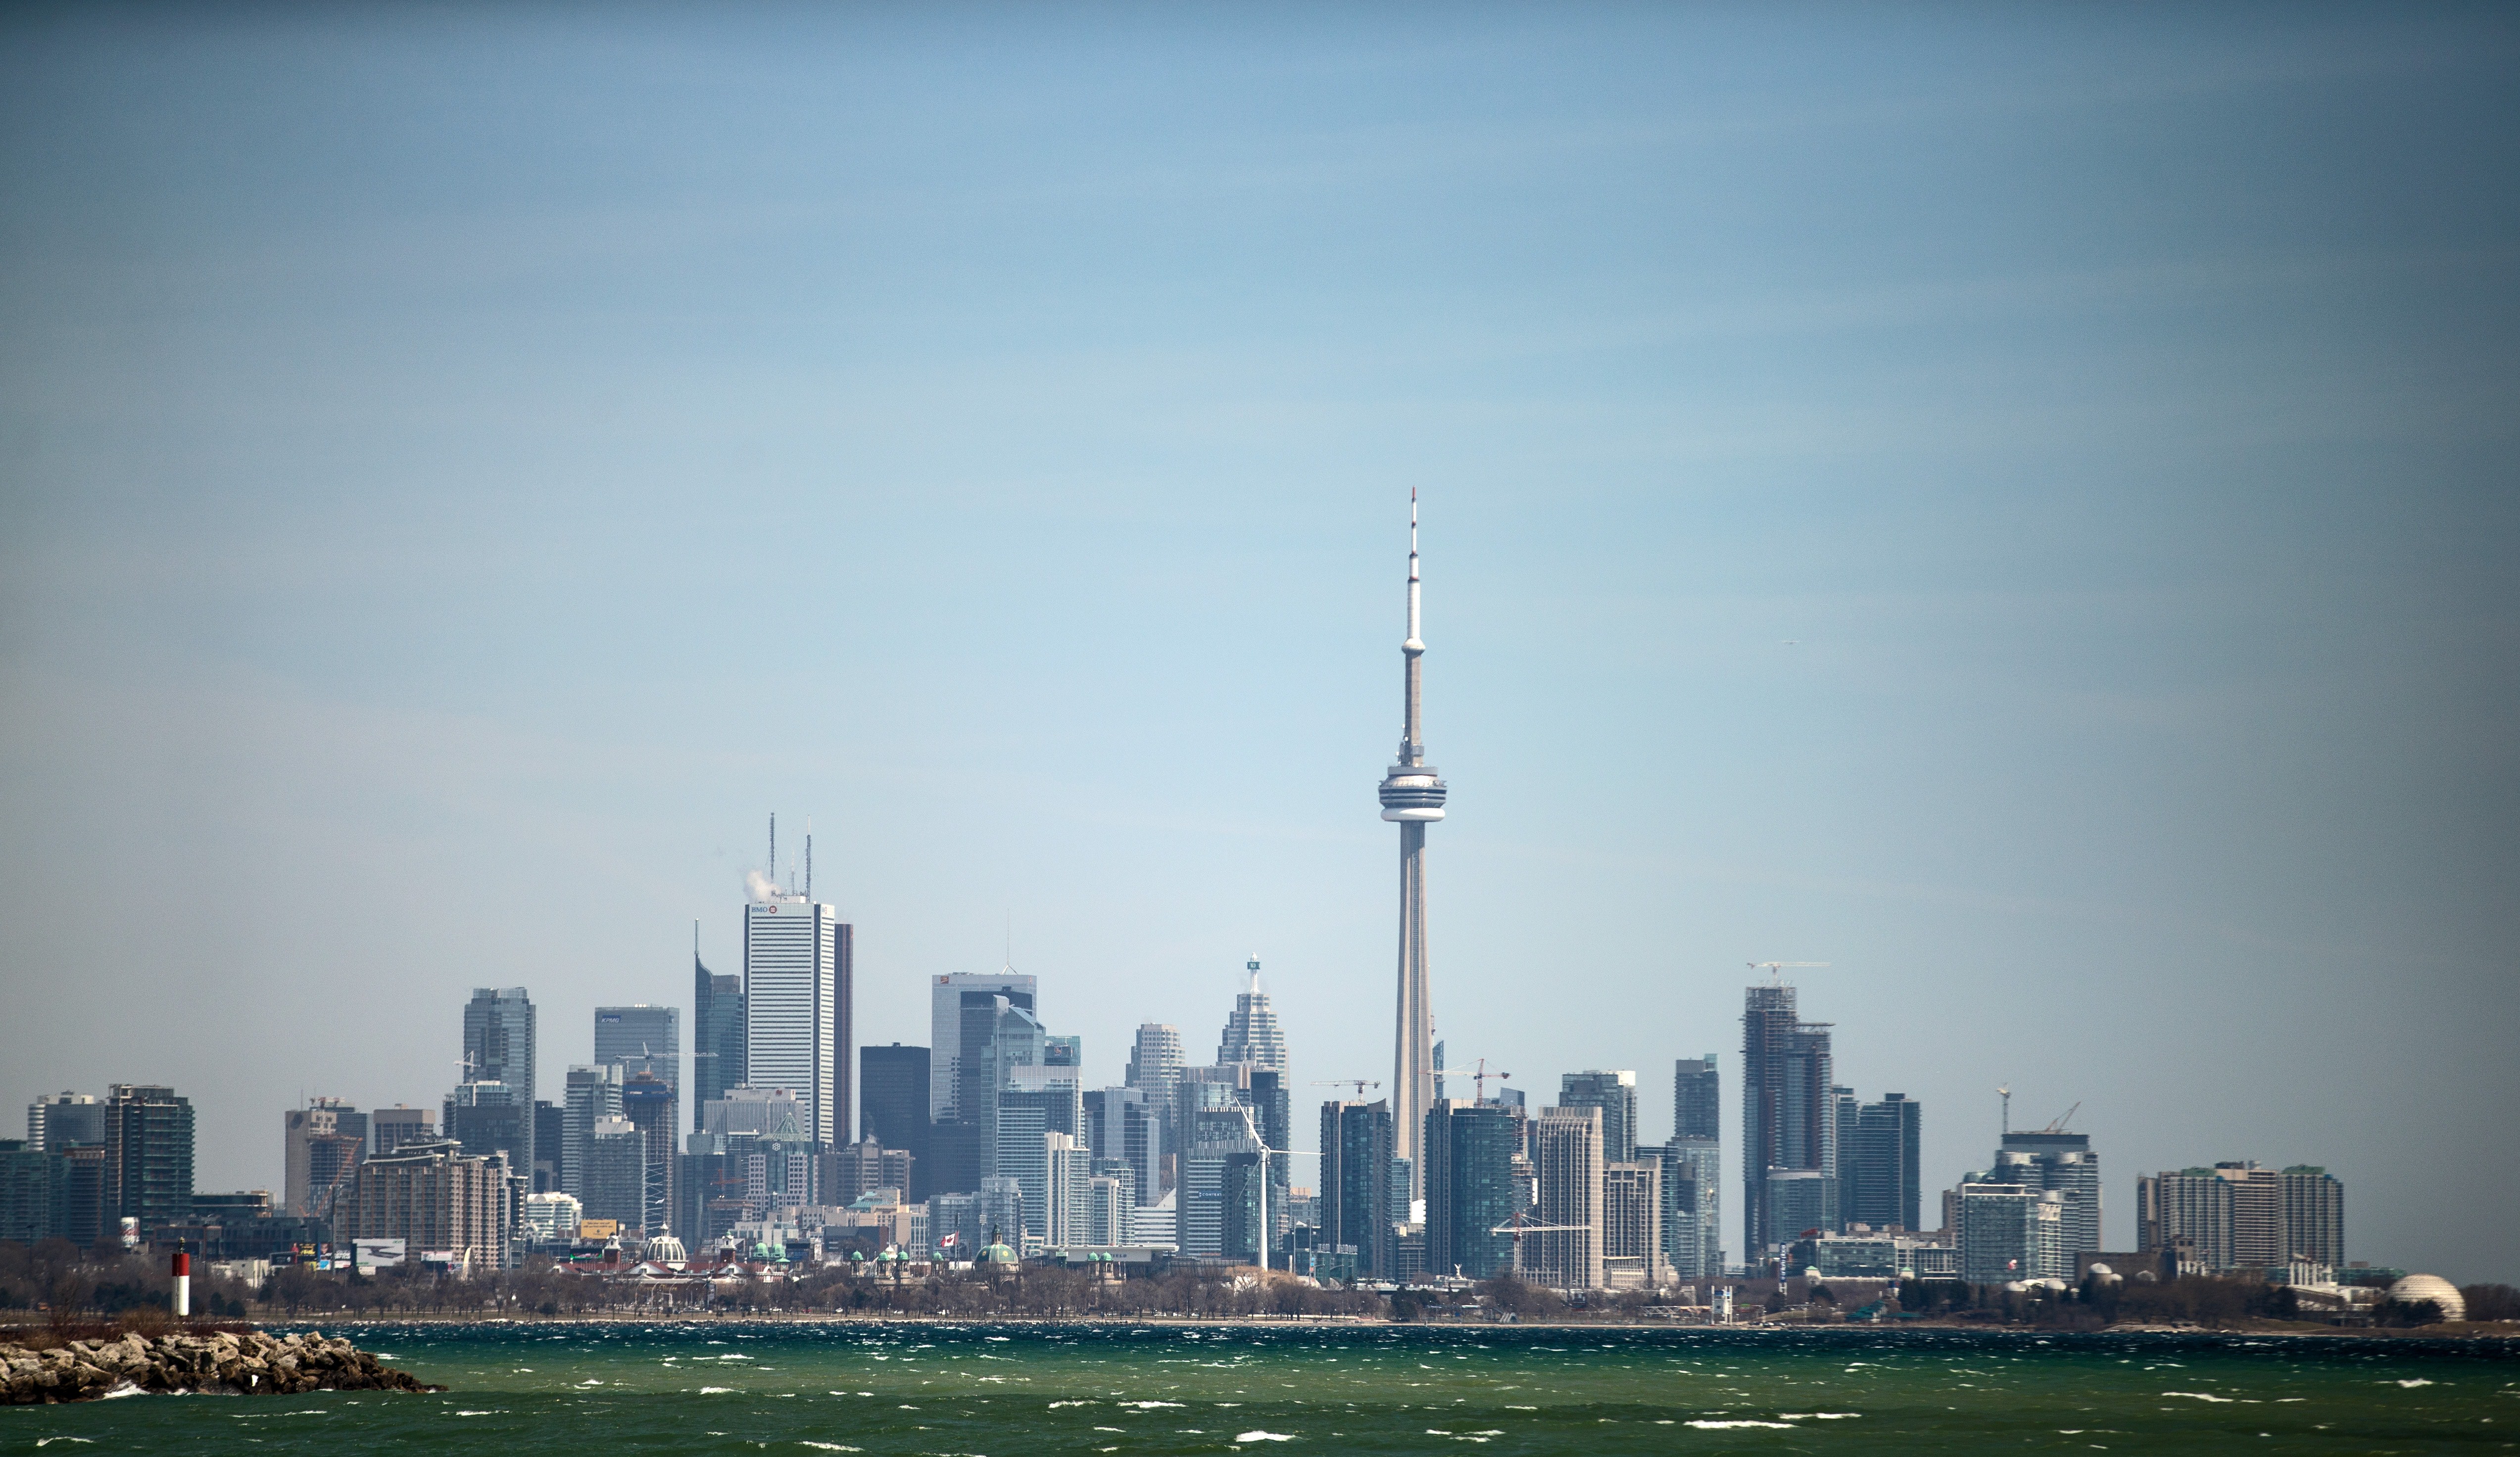 By mid-century, the Toronto region could overtake Los Angeles to become the second-largest metropolitan area in the United States and Canada.